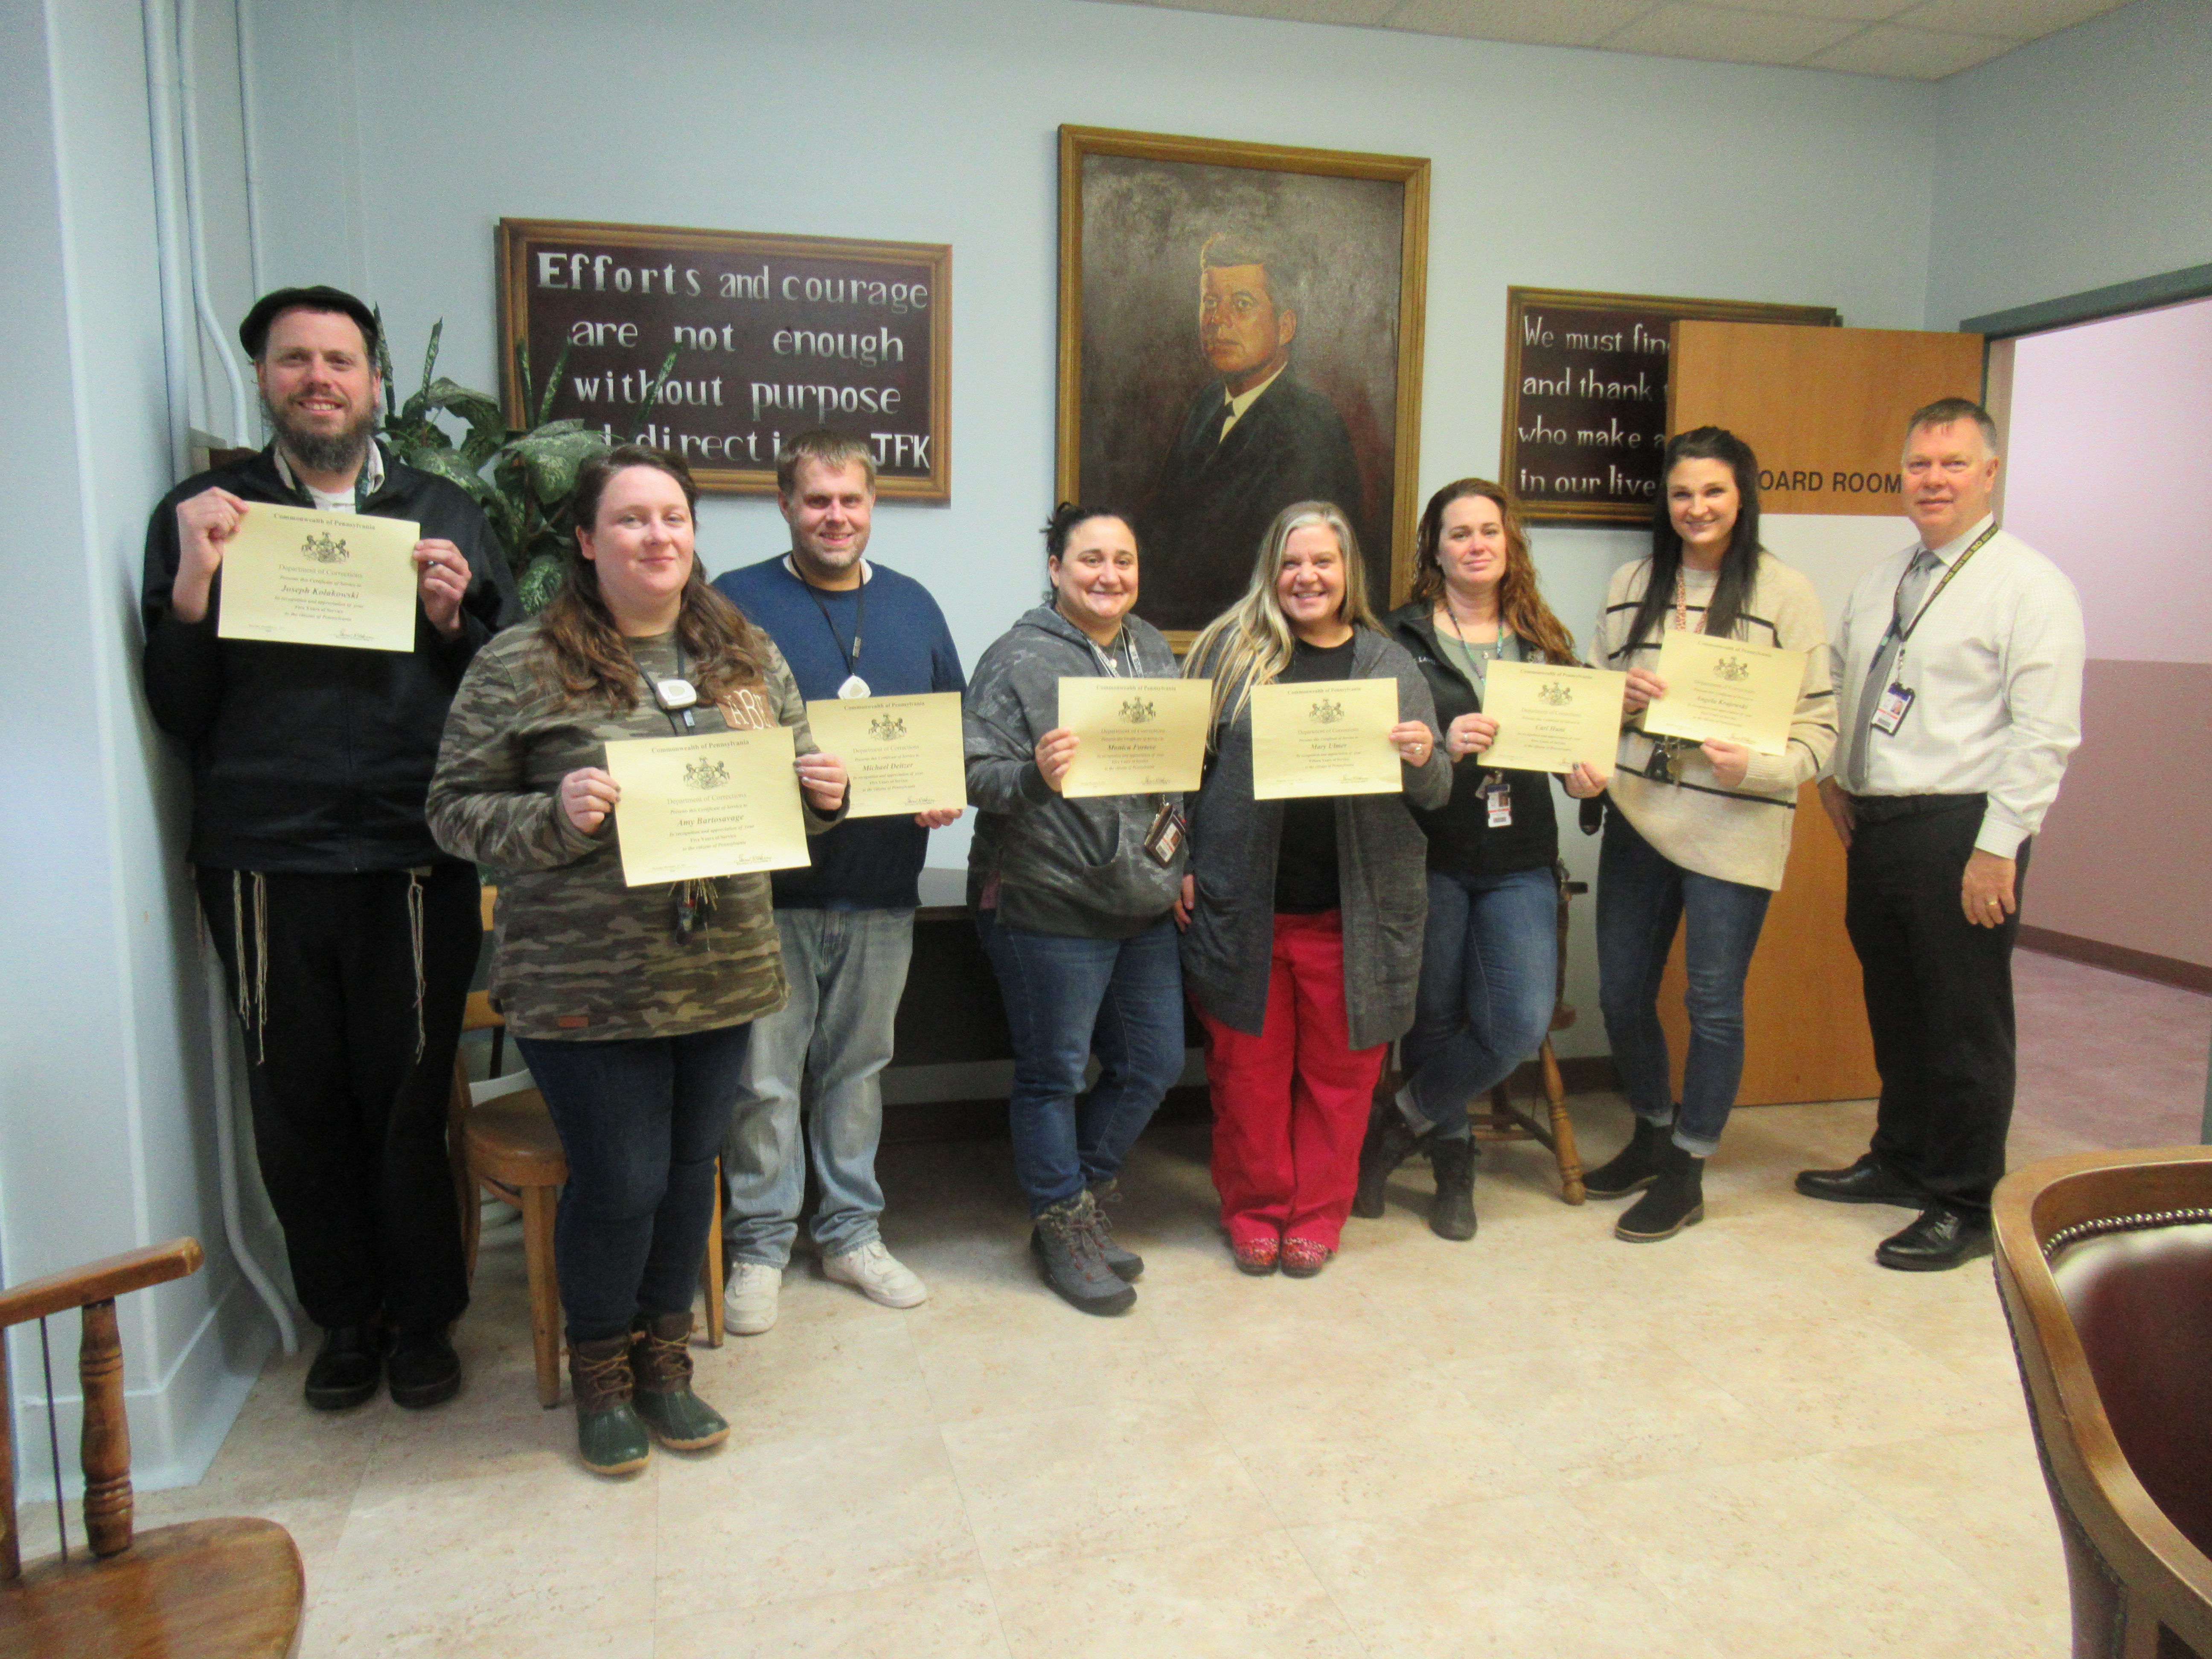 A group of people holding certificates.